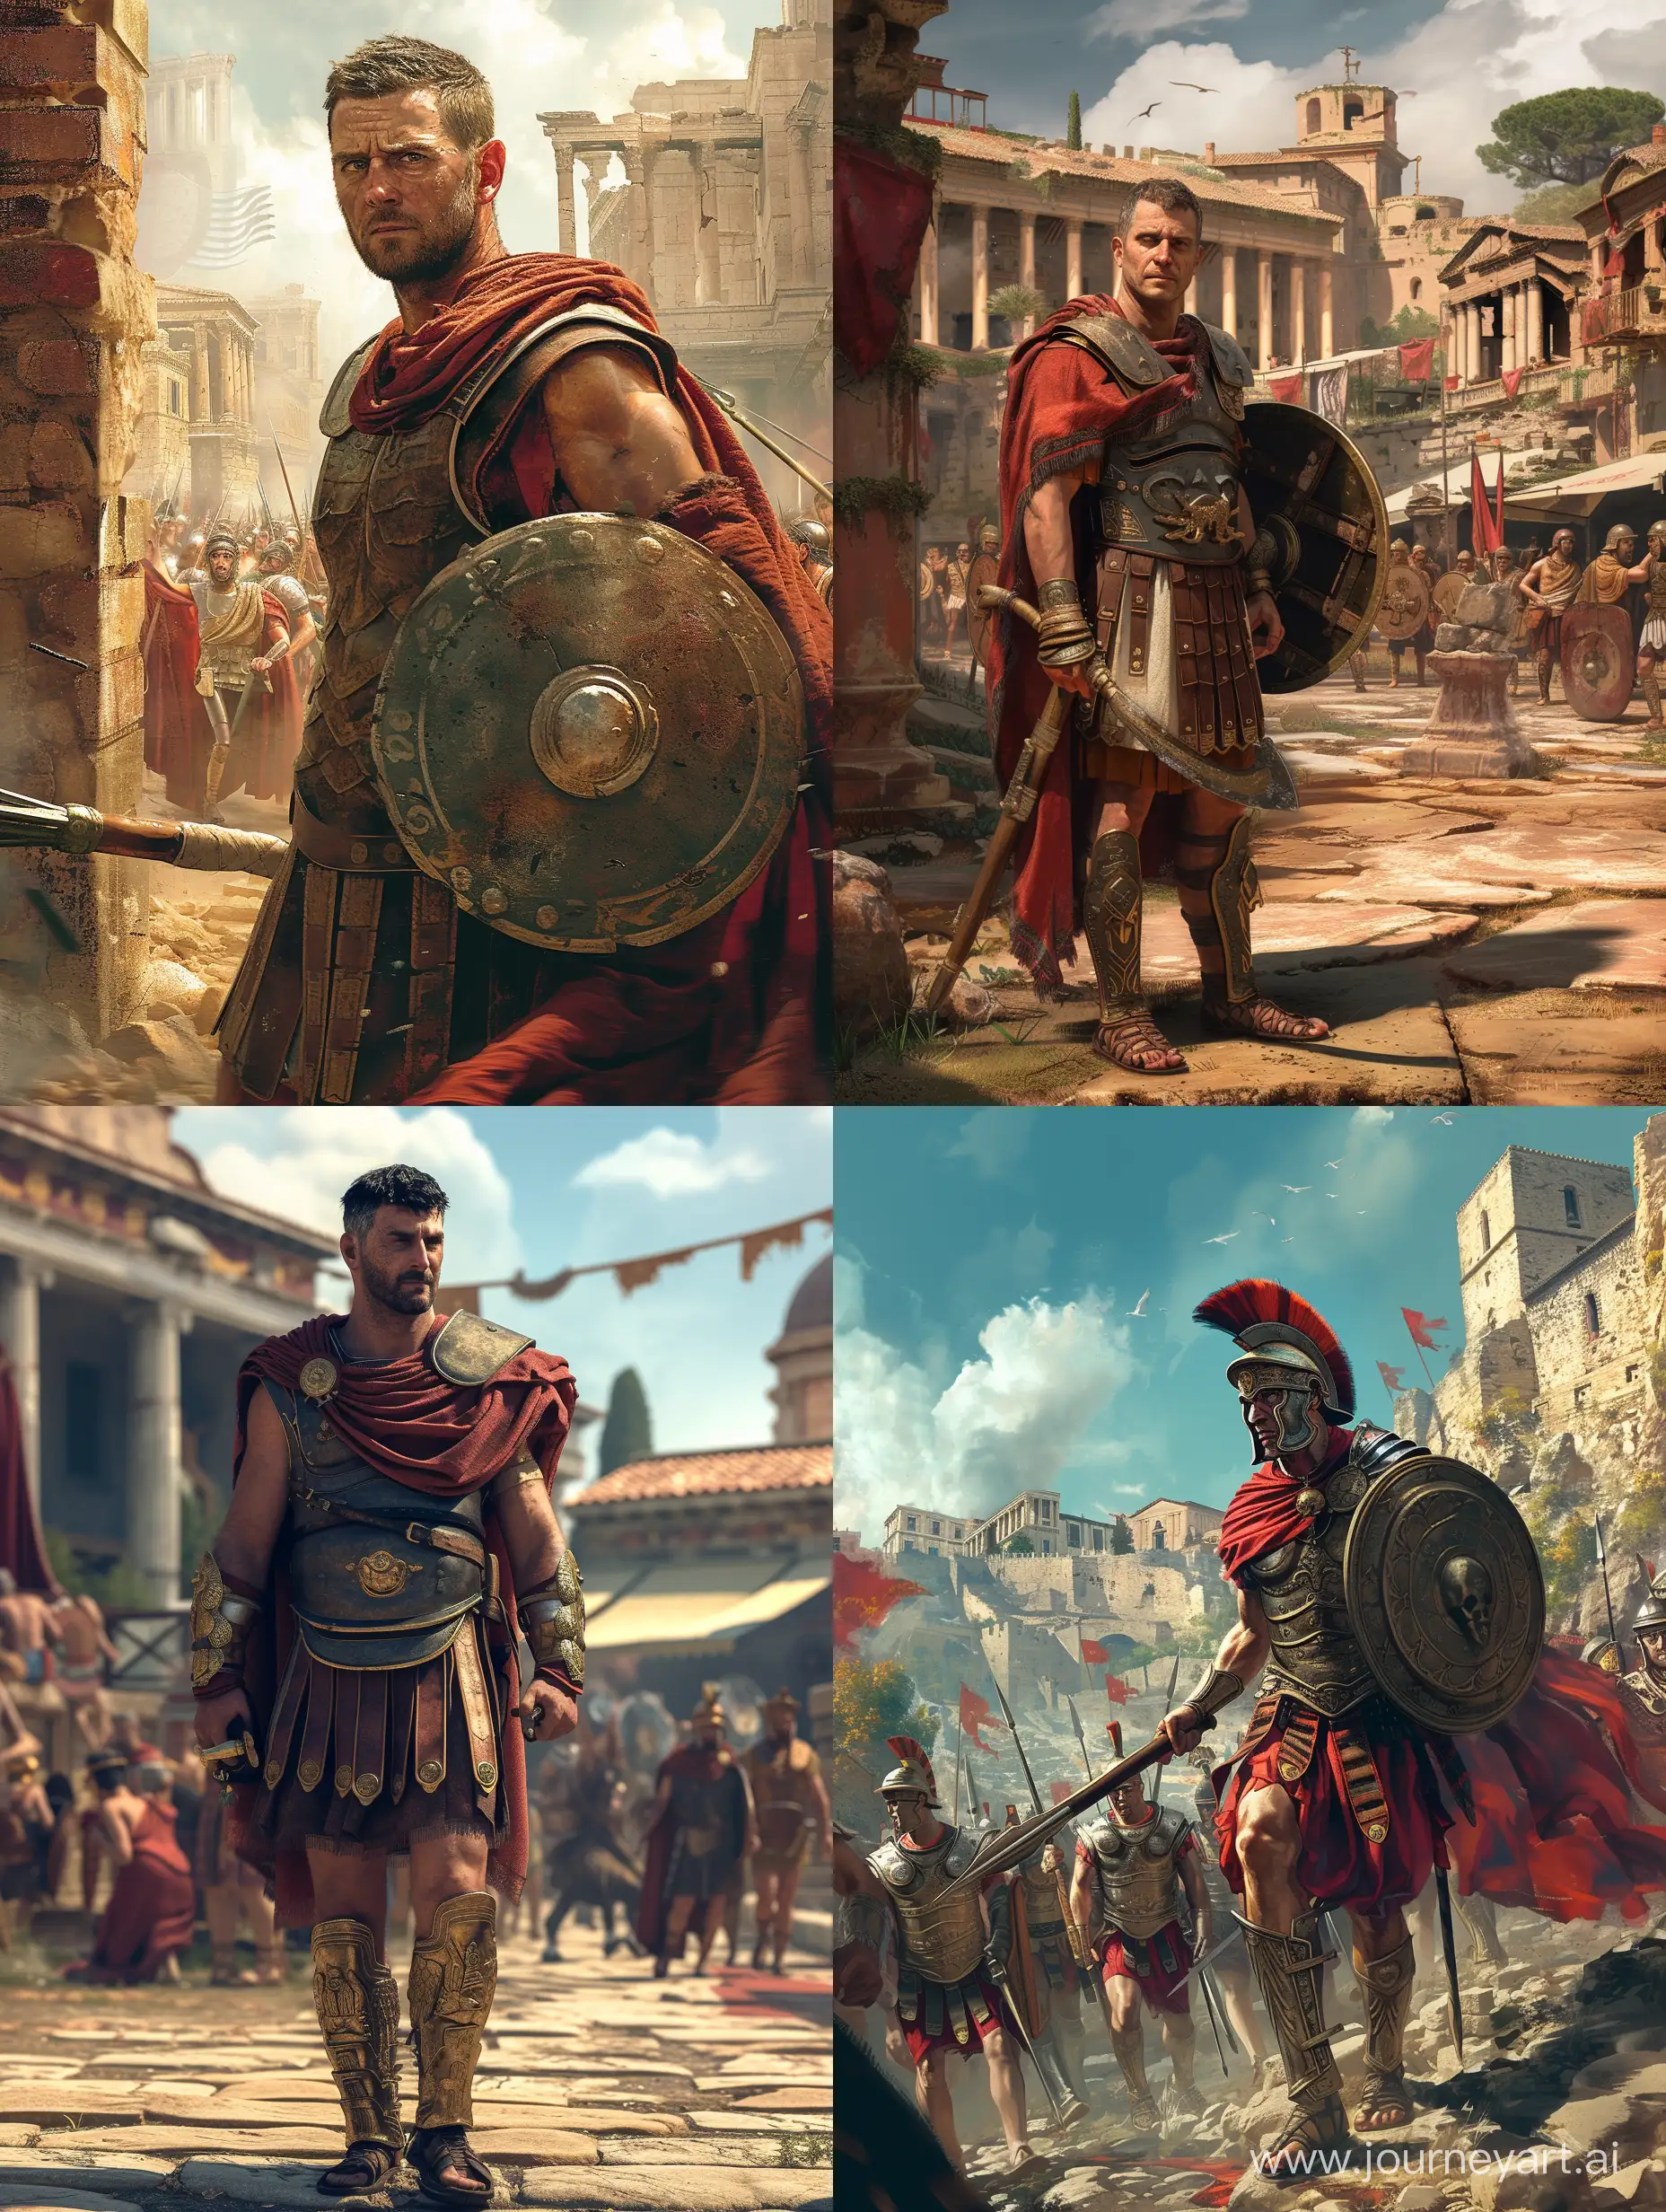 Thracian-Fighter-in-Ancient-Roman-City-HighResolution-Realistic-4K-Art